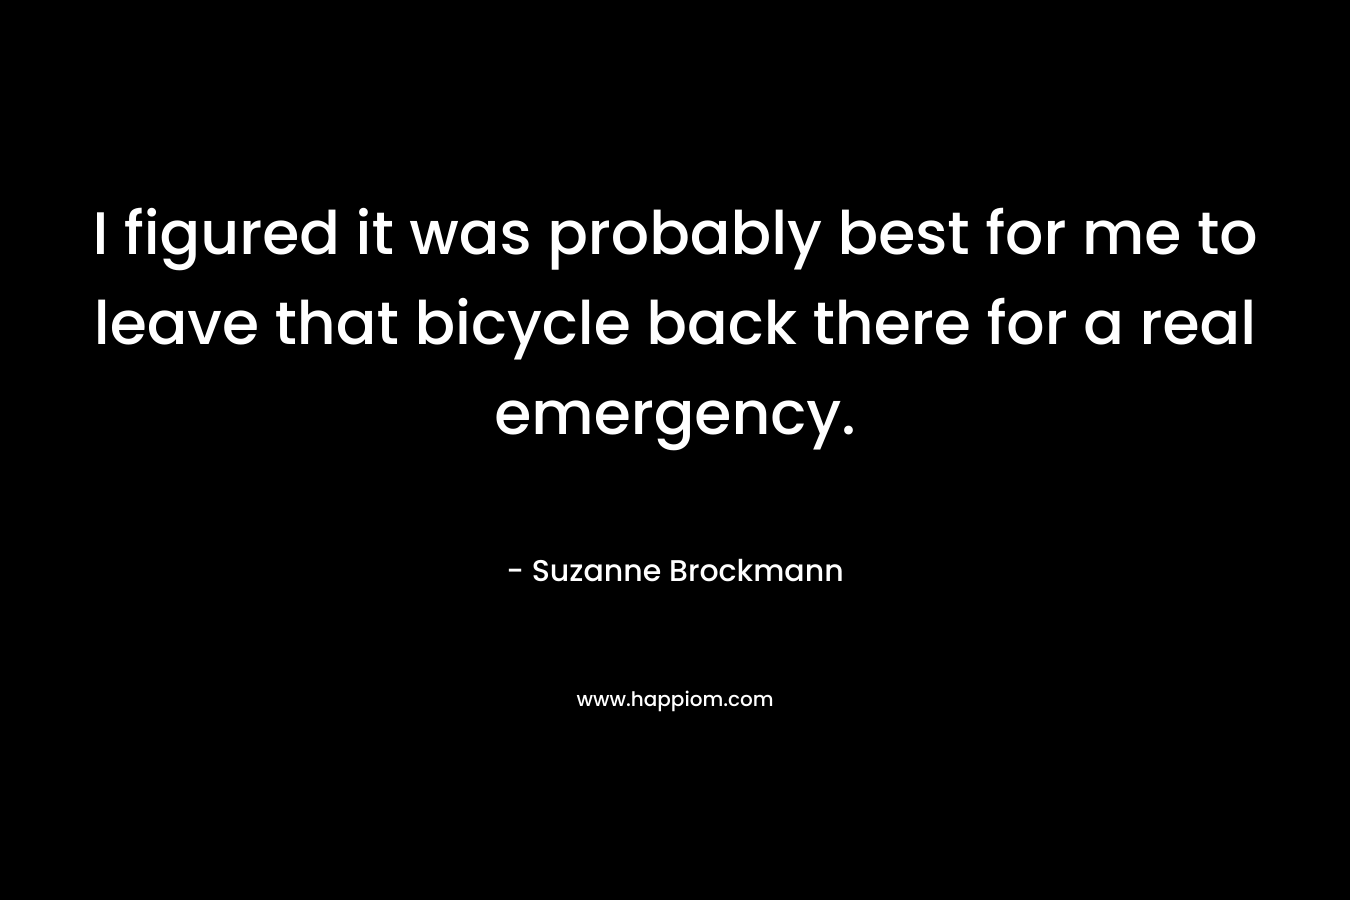 I figured it was probably best for me to leave that bicycle back there for a real emergency. – Suzanne Brockmann